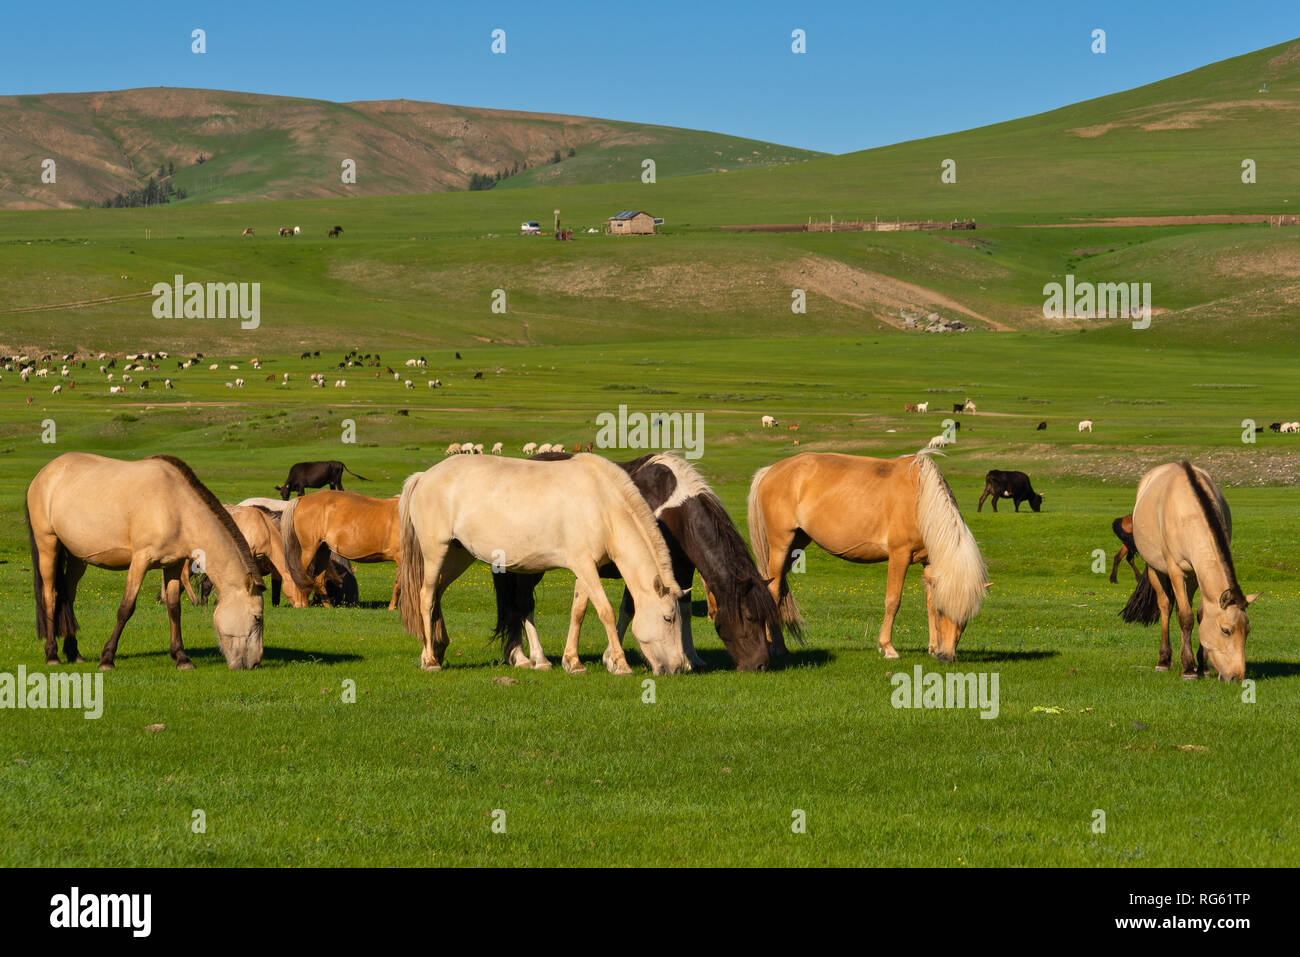 Horses grazing in Orkhon River Valley, Kharkhorin, Ovorkhangai Province, Mongolia Stock Photo